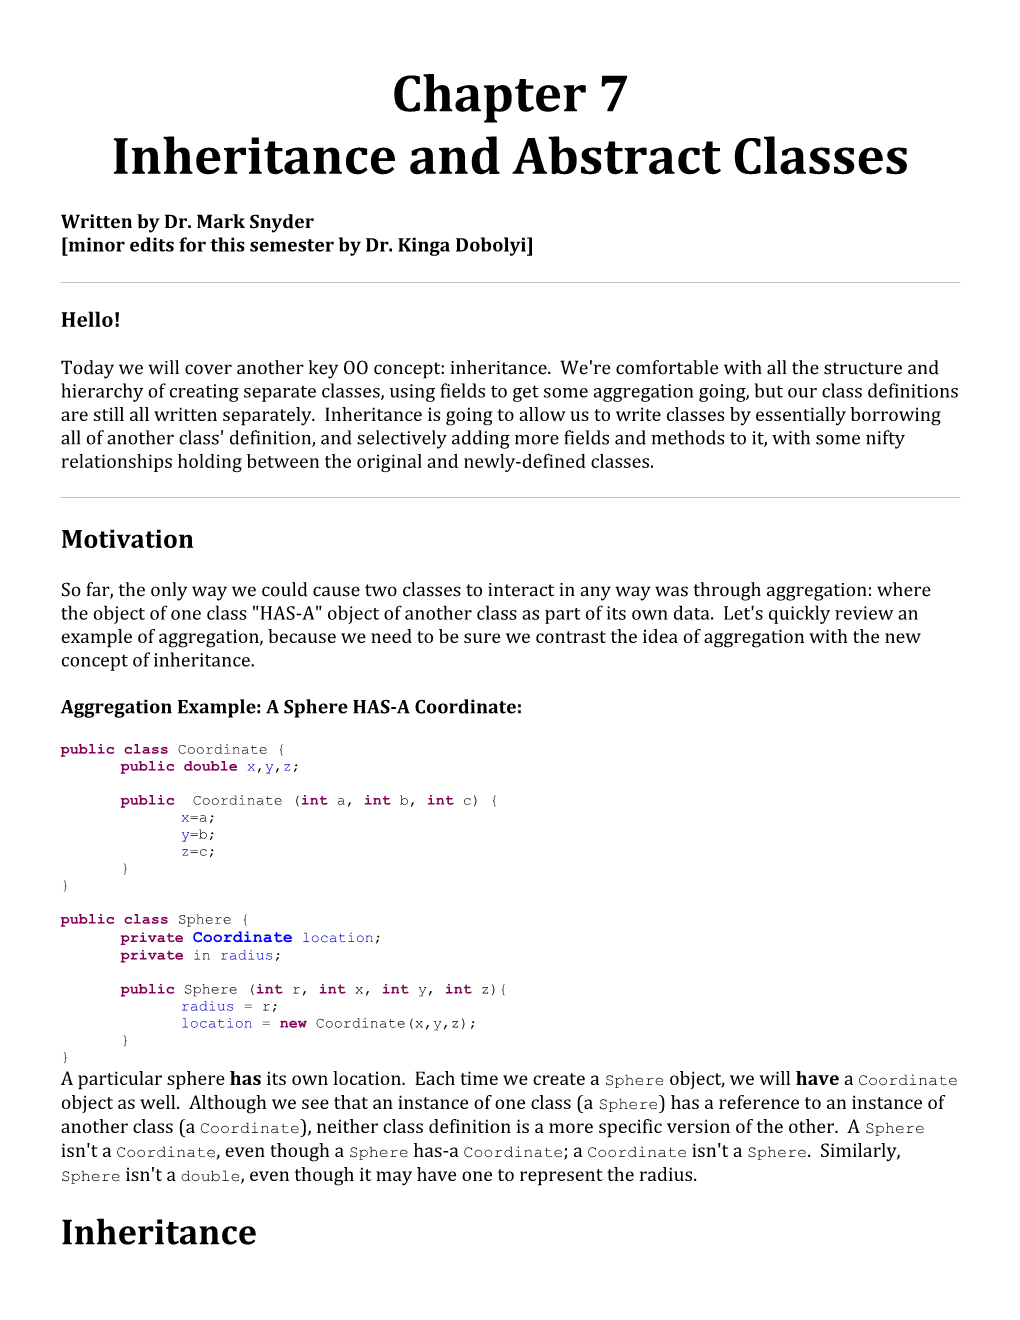 Inheritance and Abstract Classes